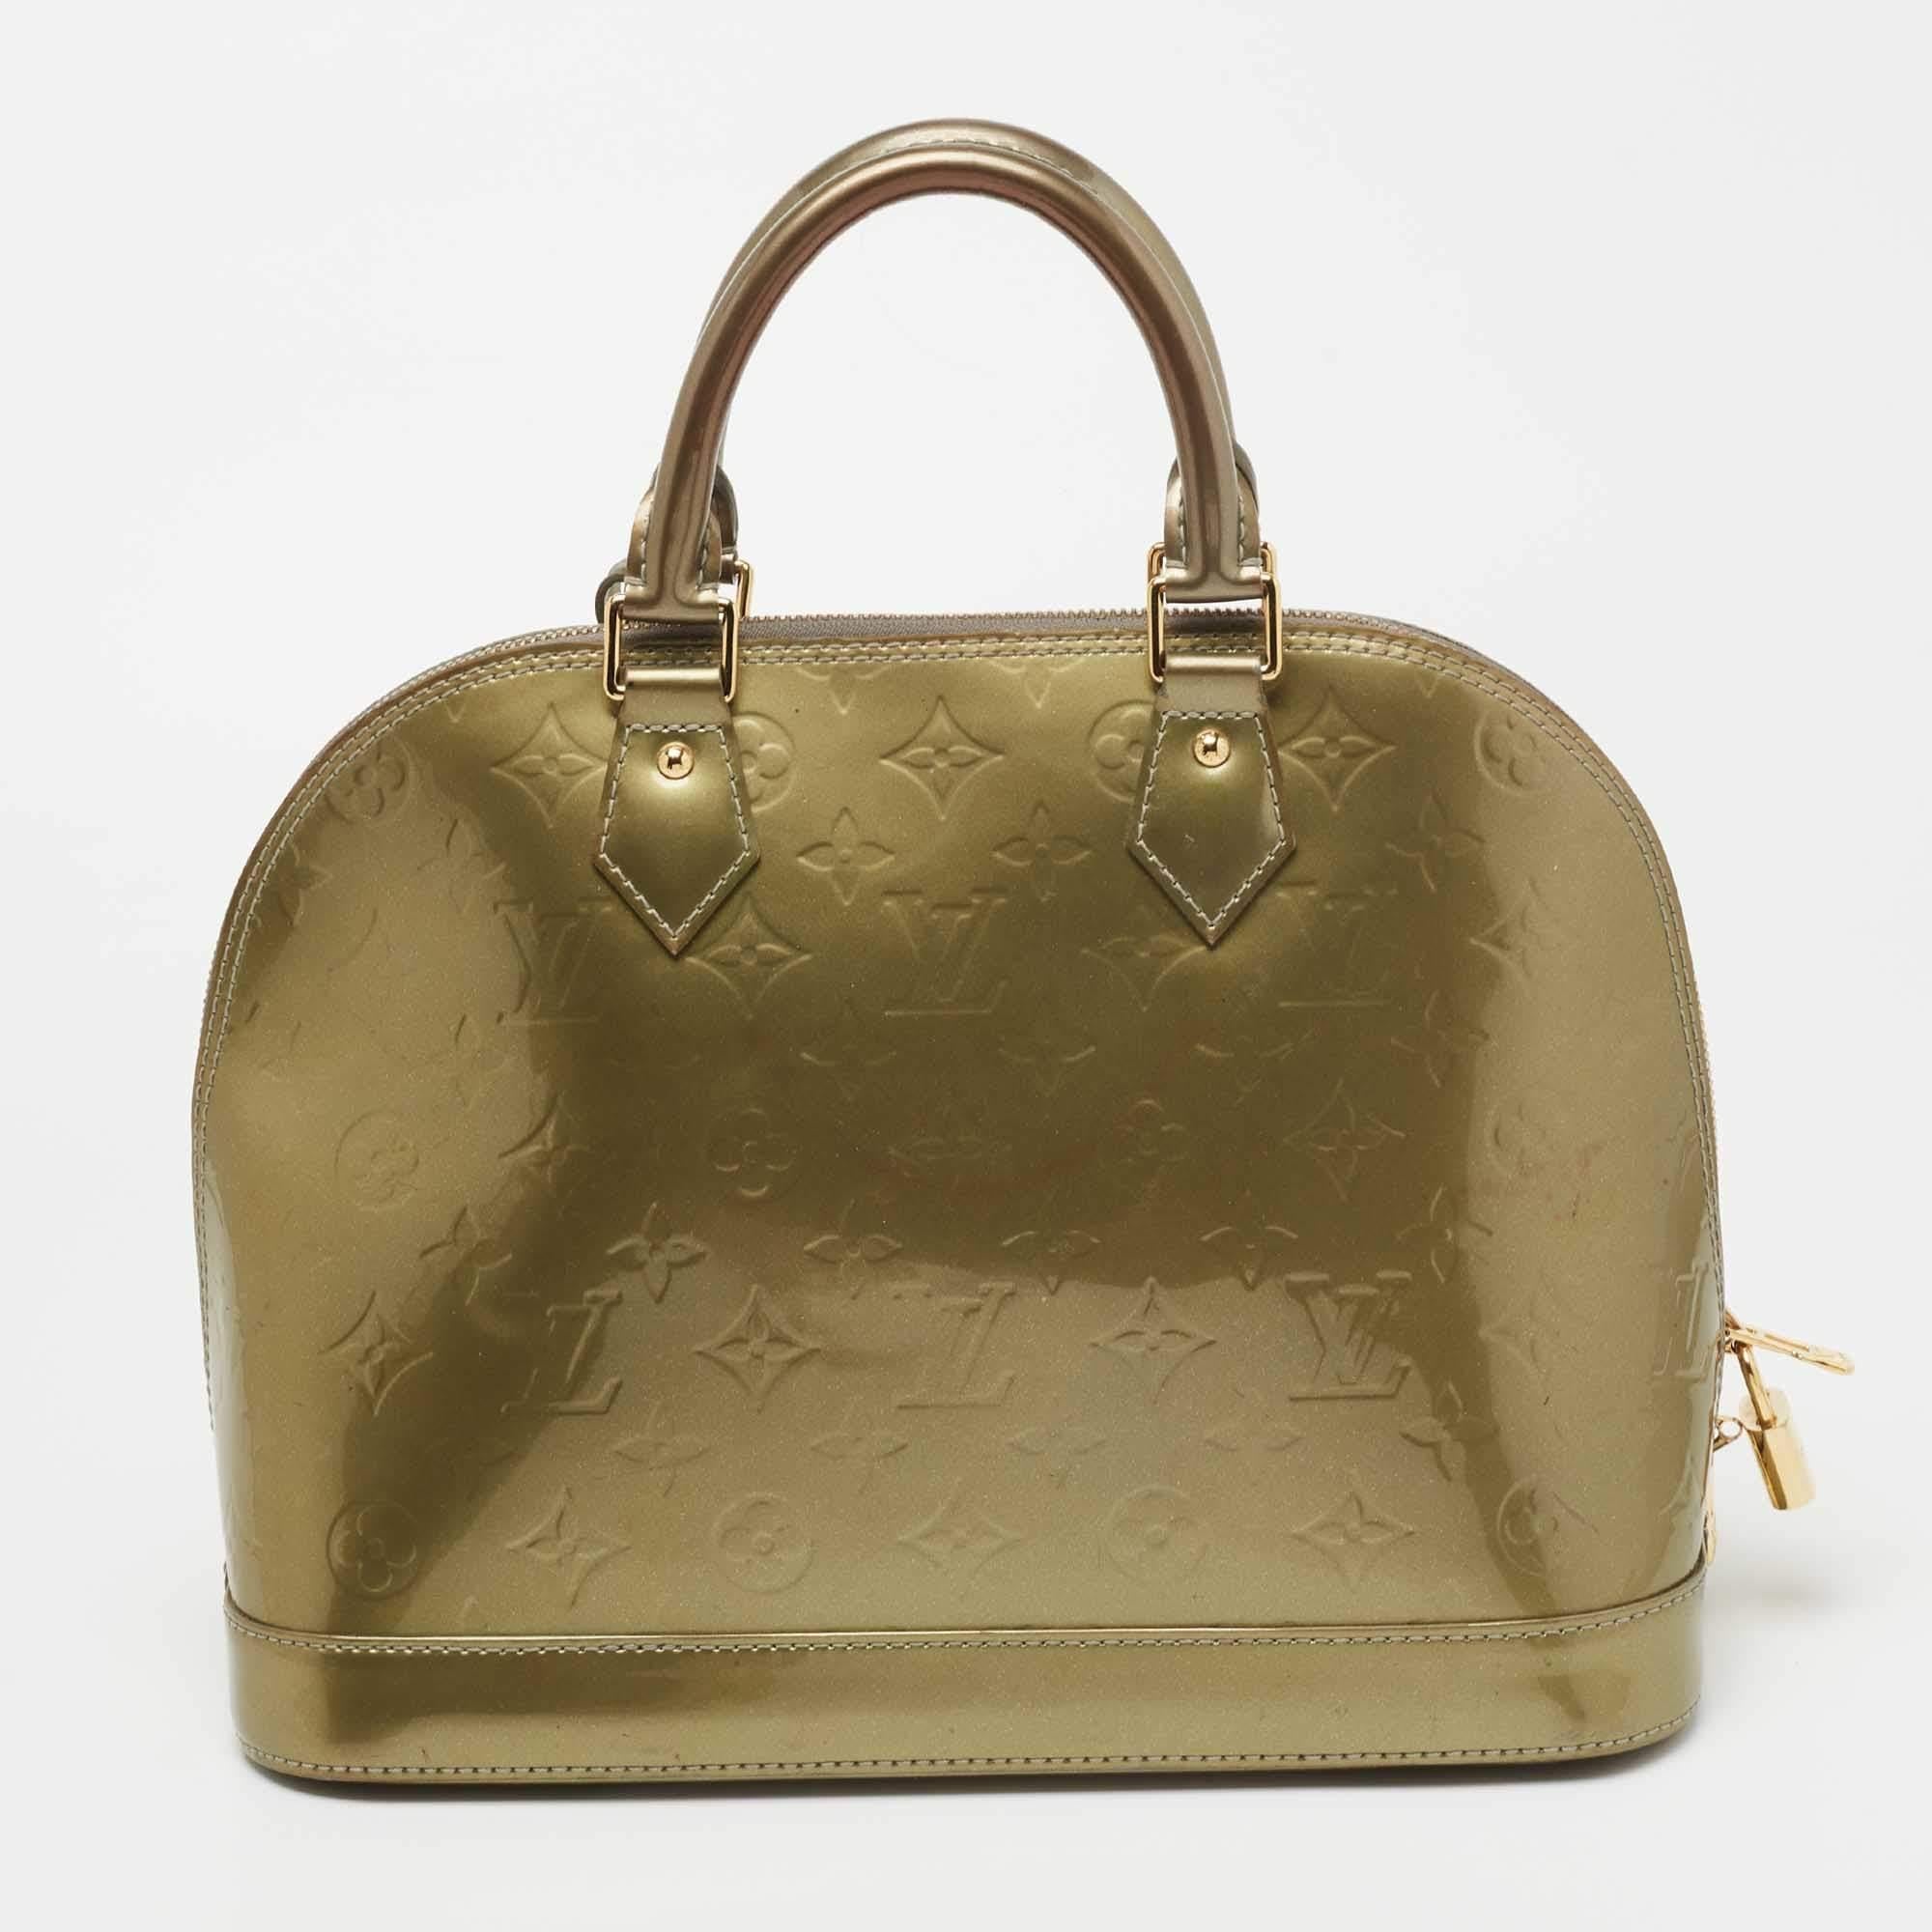 Louis Vuitton handbags are known for their unique designs that emanate the label's elegant flair, and the label's immaculate craftsmanship makes their creations last season after season. Here is a stunning bag, meticulously crafted and stitched to